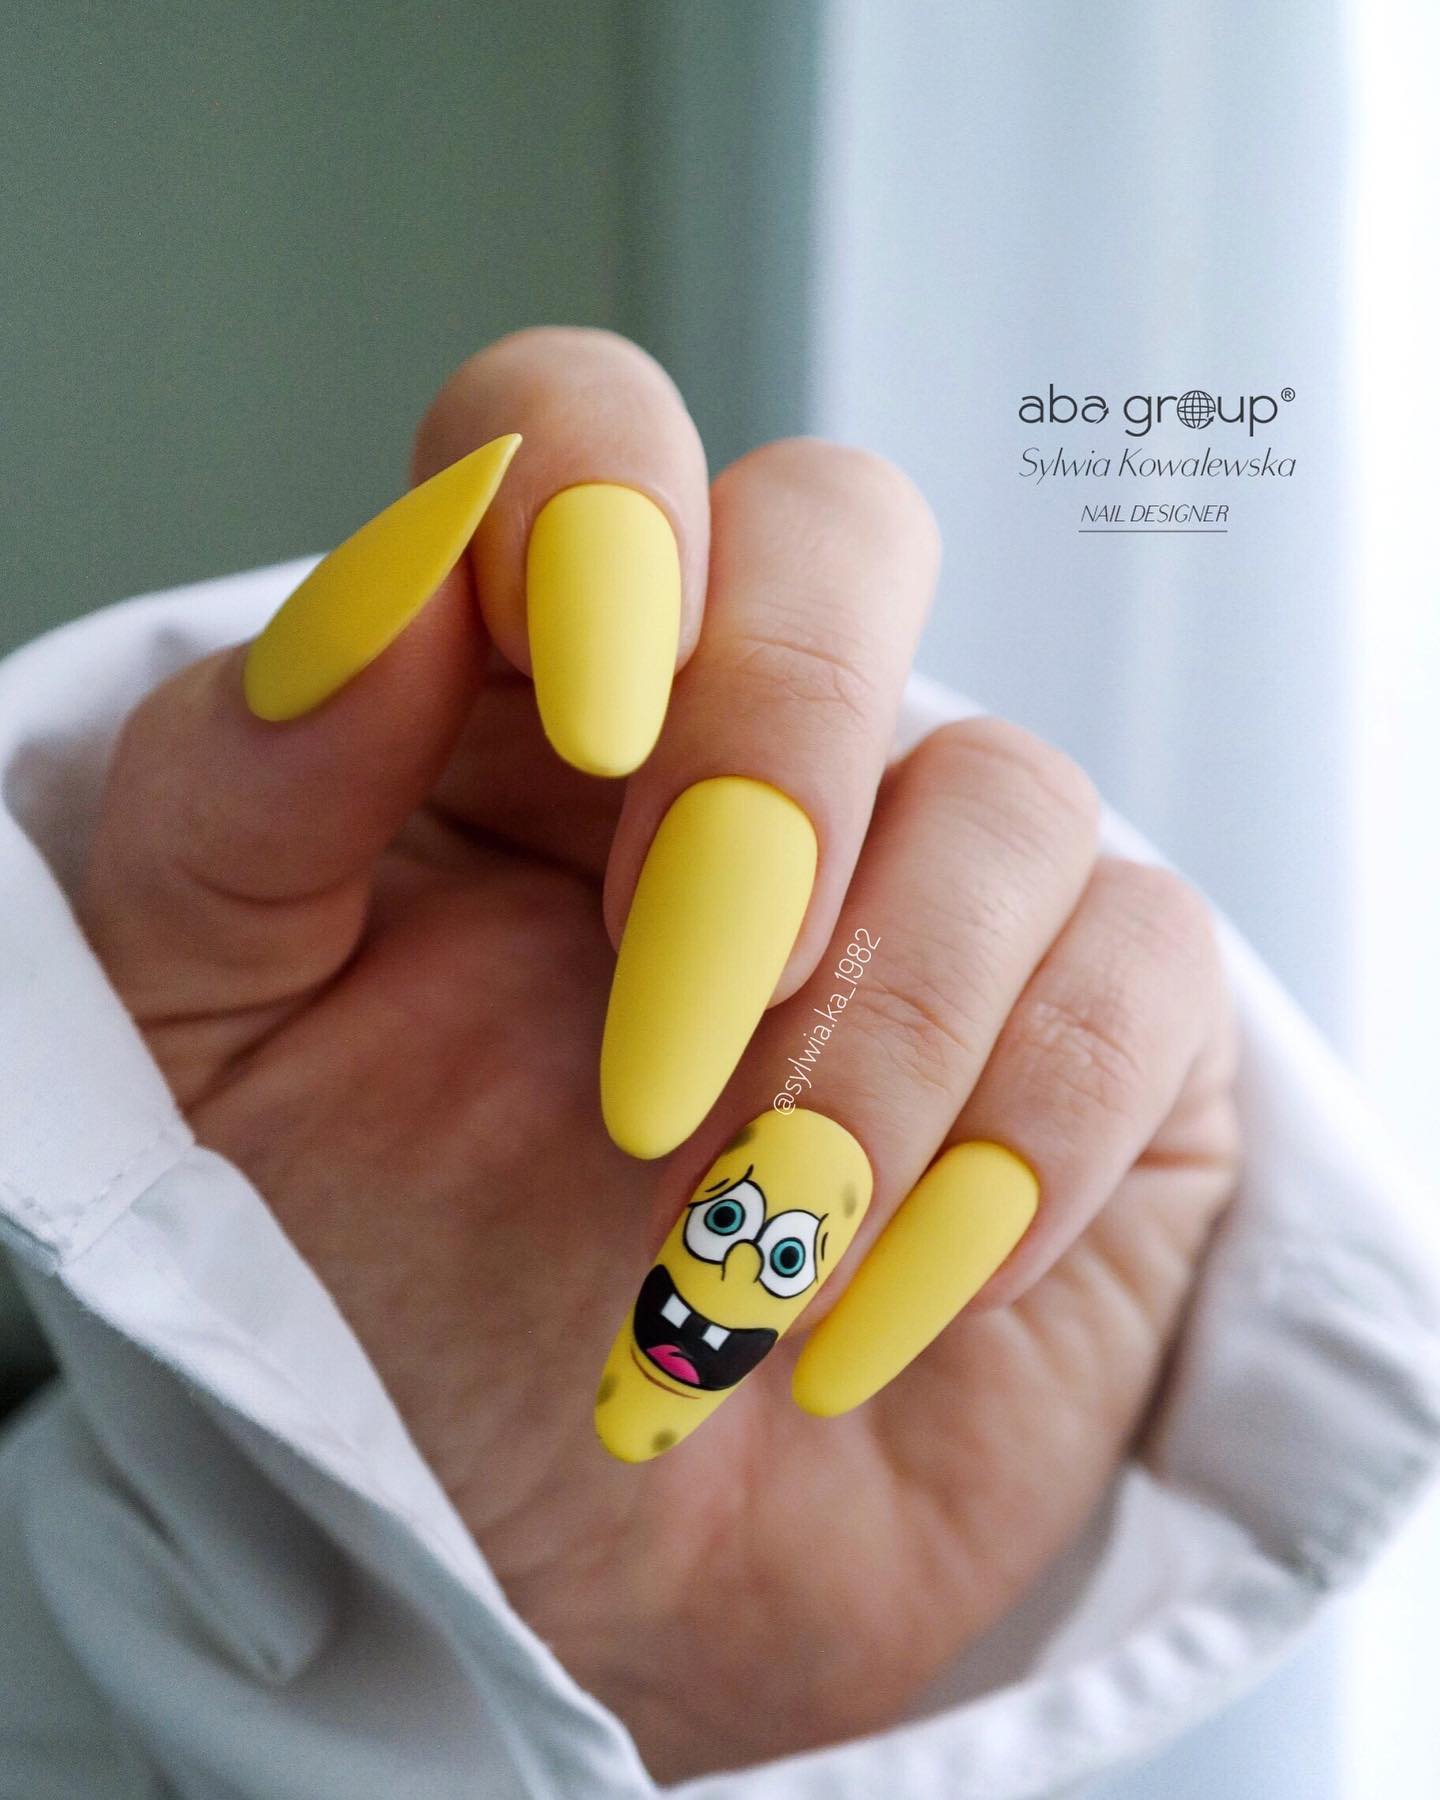 If you want to have fun with your nails, try out the sponge bob nail art with matte yellow nail polish. The best part about this particular design is that it looks great on both short and long nails.